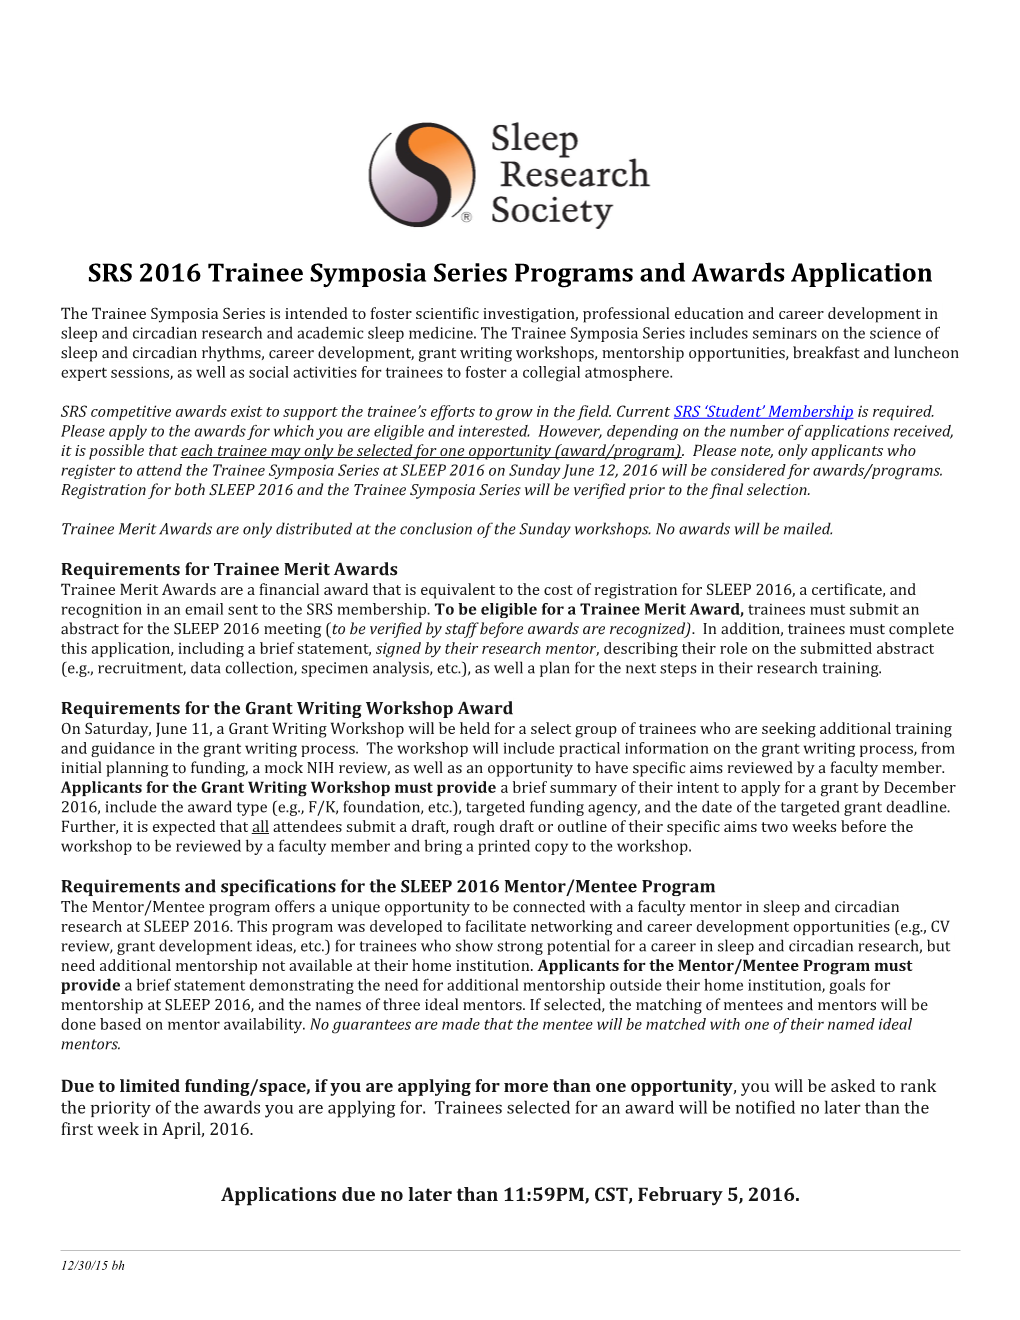 SRS 2016 Trainee Symposia Series Programs and Awards Application